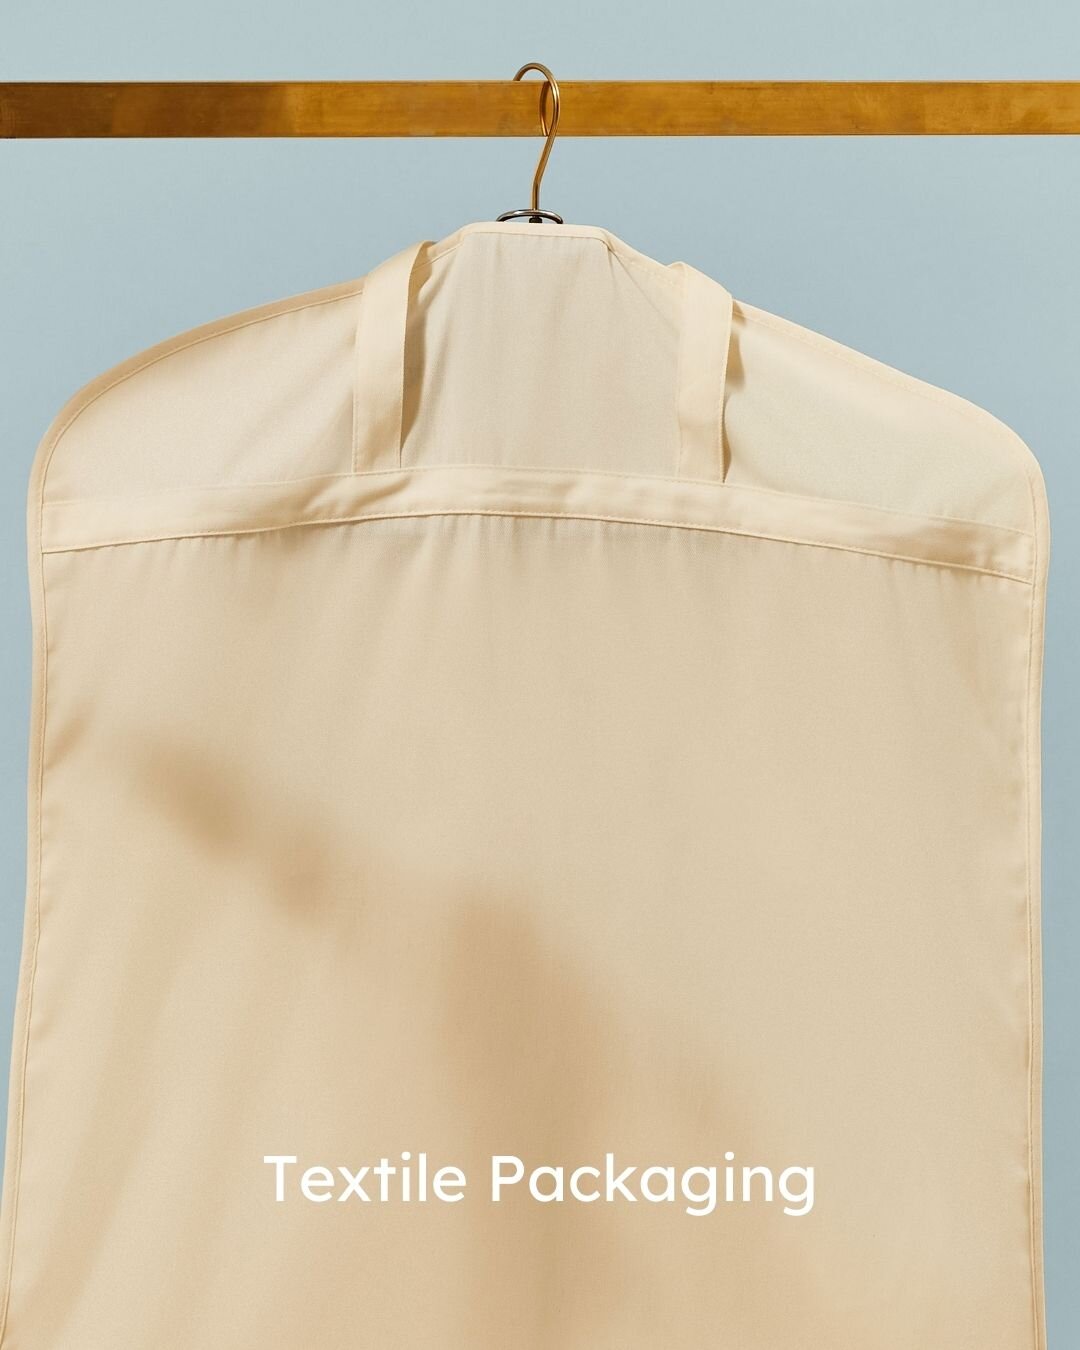 TEXTILE PACKAGING